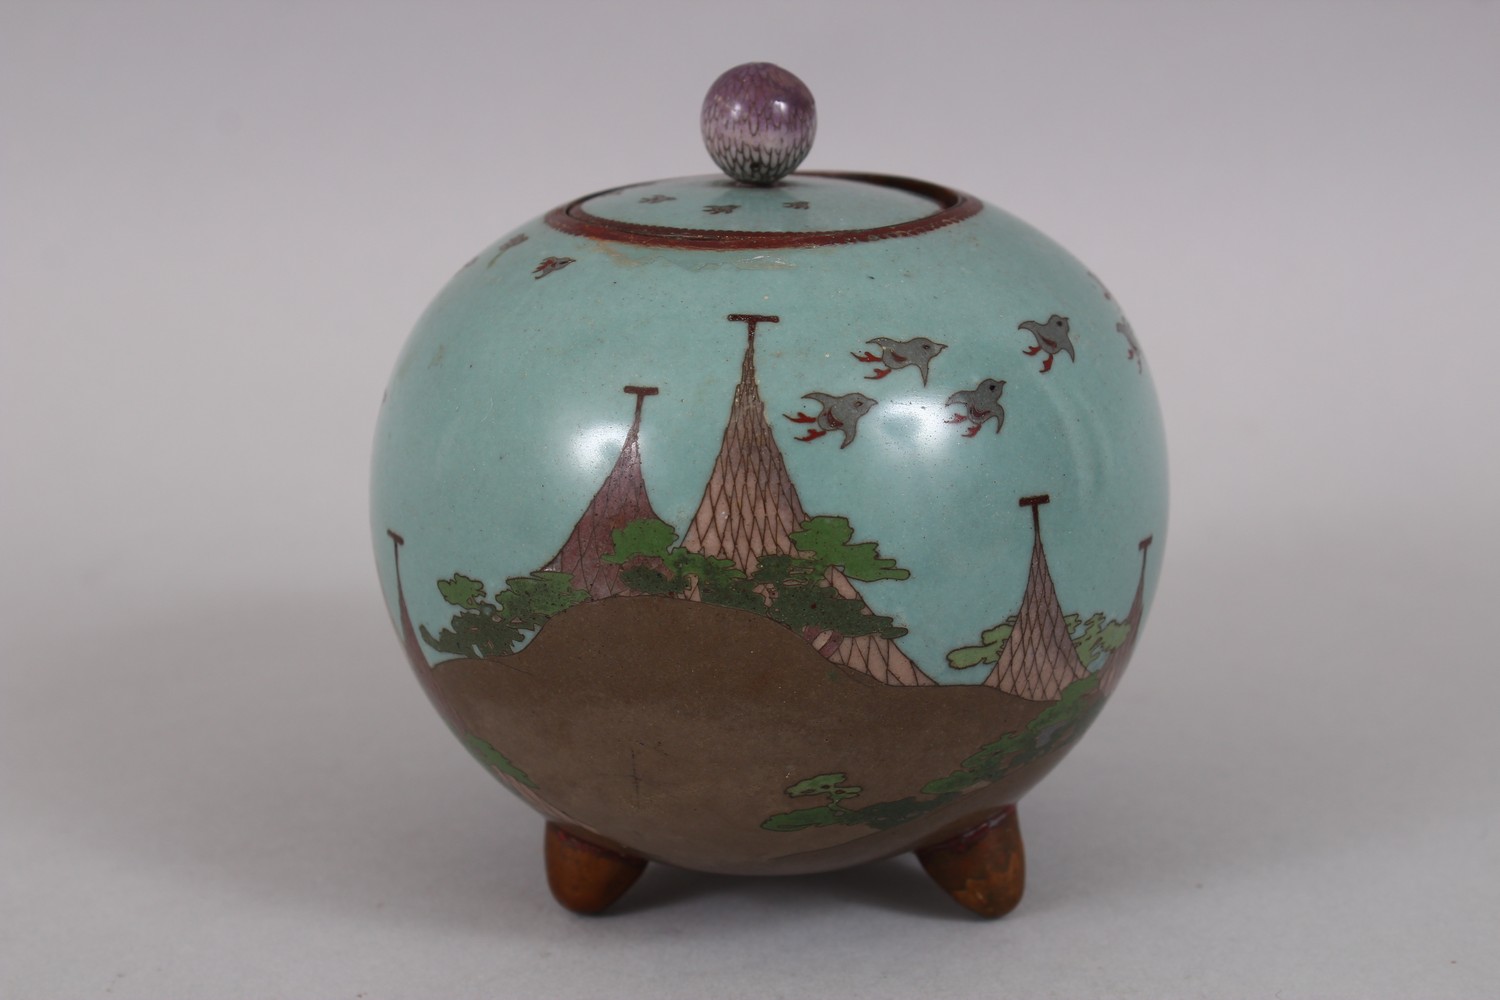 A GOOD JAPANESE MEIJI PERIOD GLOBULAR LIDDED CLOISONNE KORO, the body of the koro decorated with - Image 3 of 6